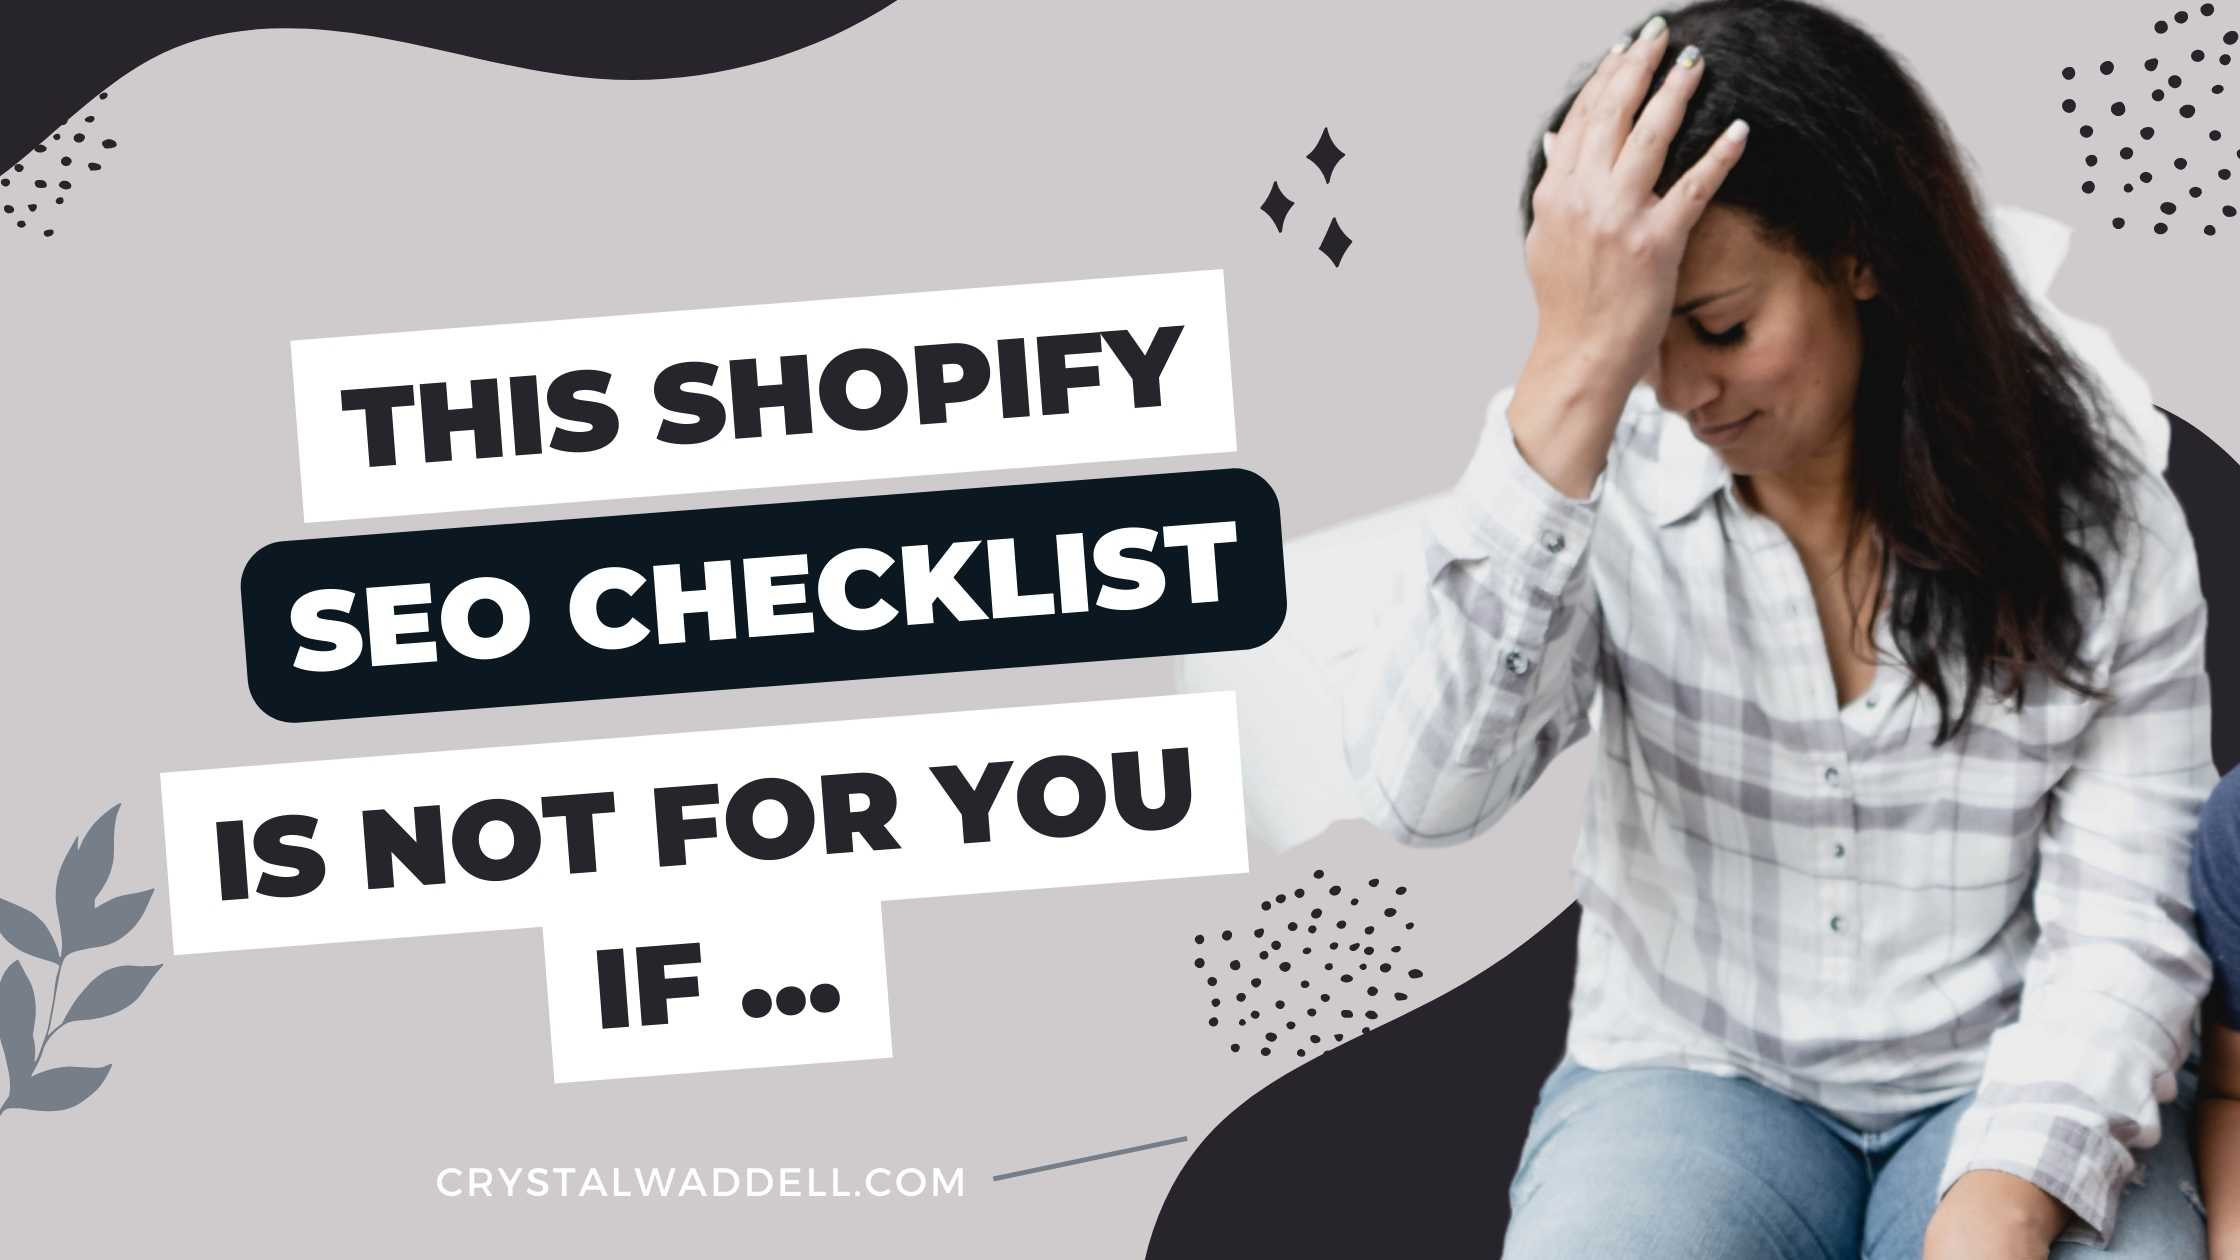 I focus on Shopify SEO techniques that apply primarily to self-fulfilled sellers or manufacturers of their own branded product - not dropshippers.